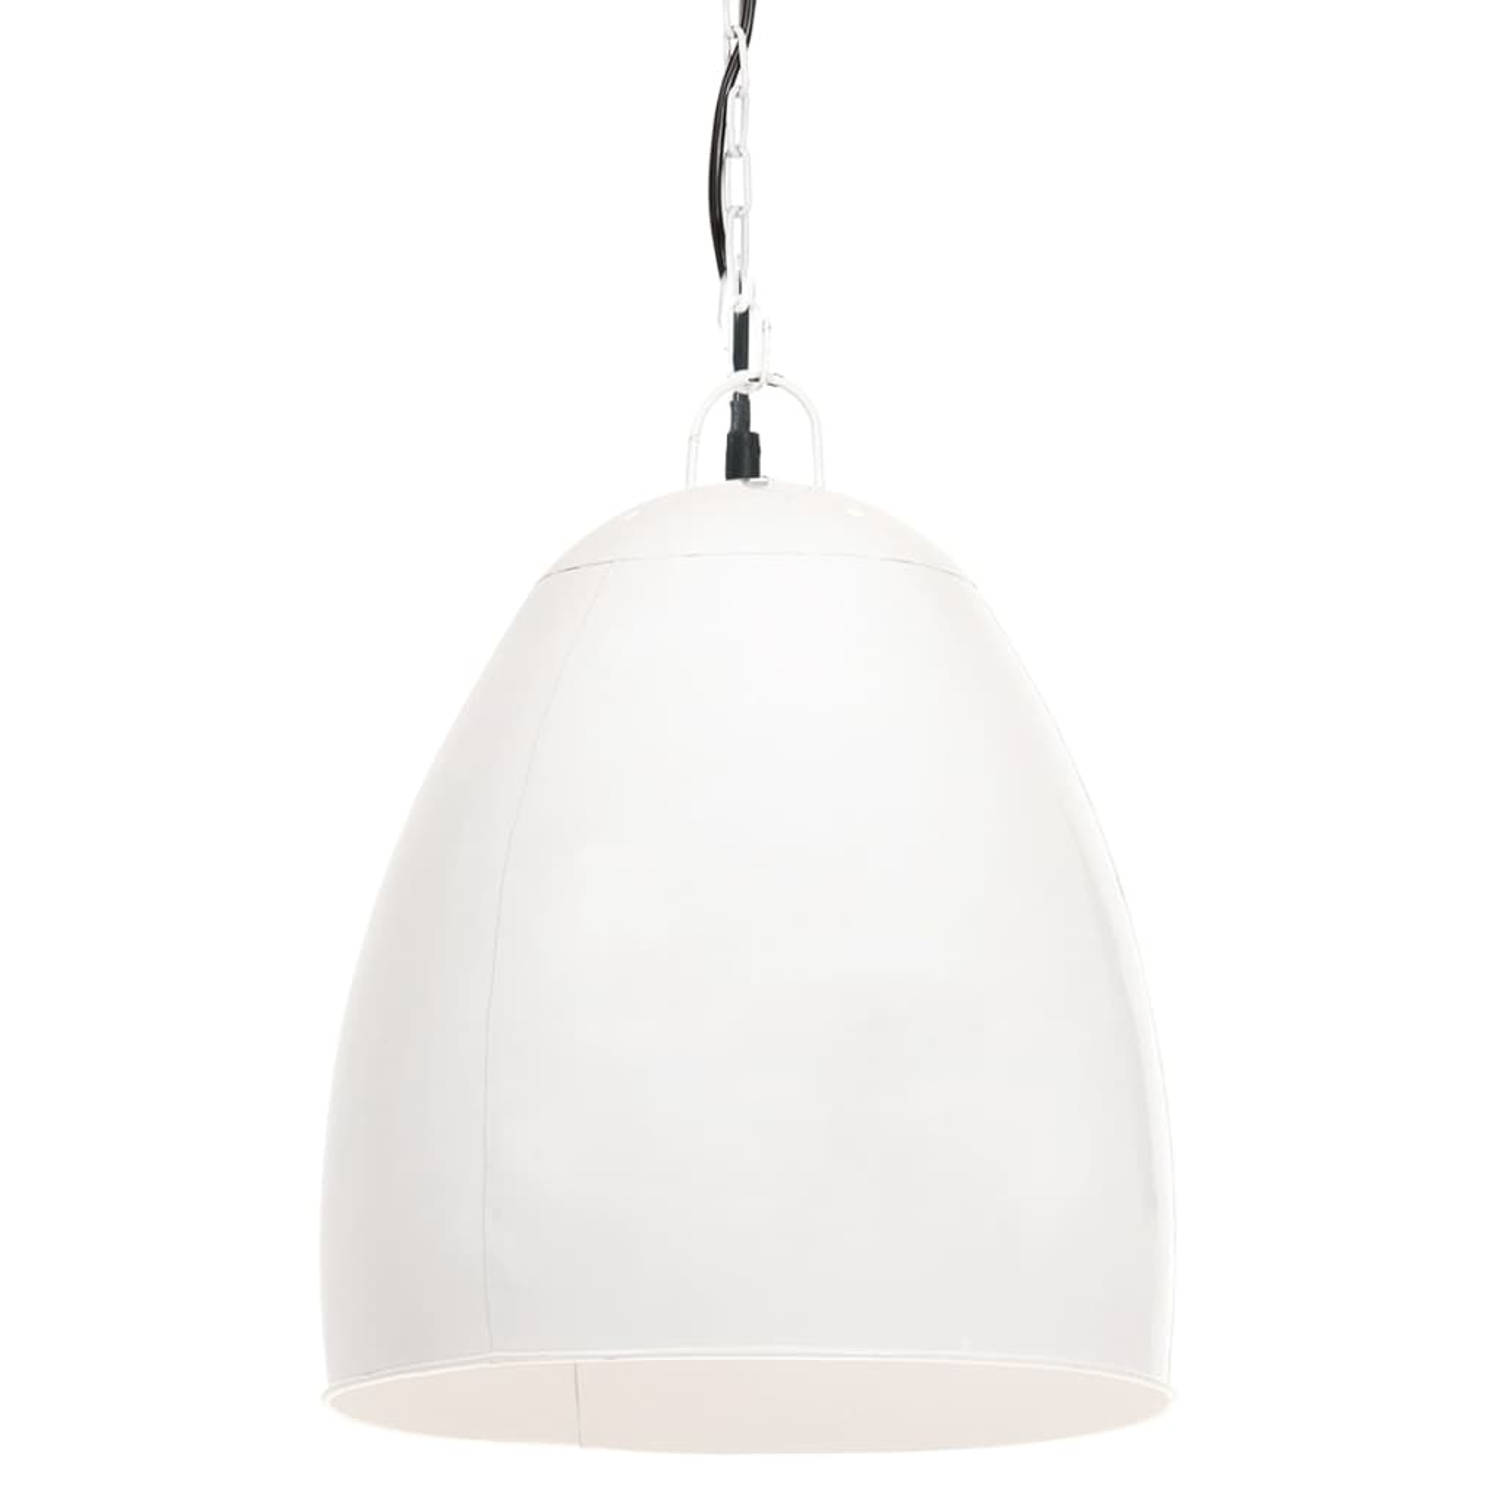 The Living Store Hanglamp Industriële Stijl 42x52 cm Wit Ijzer E27 fitting Max 25W